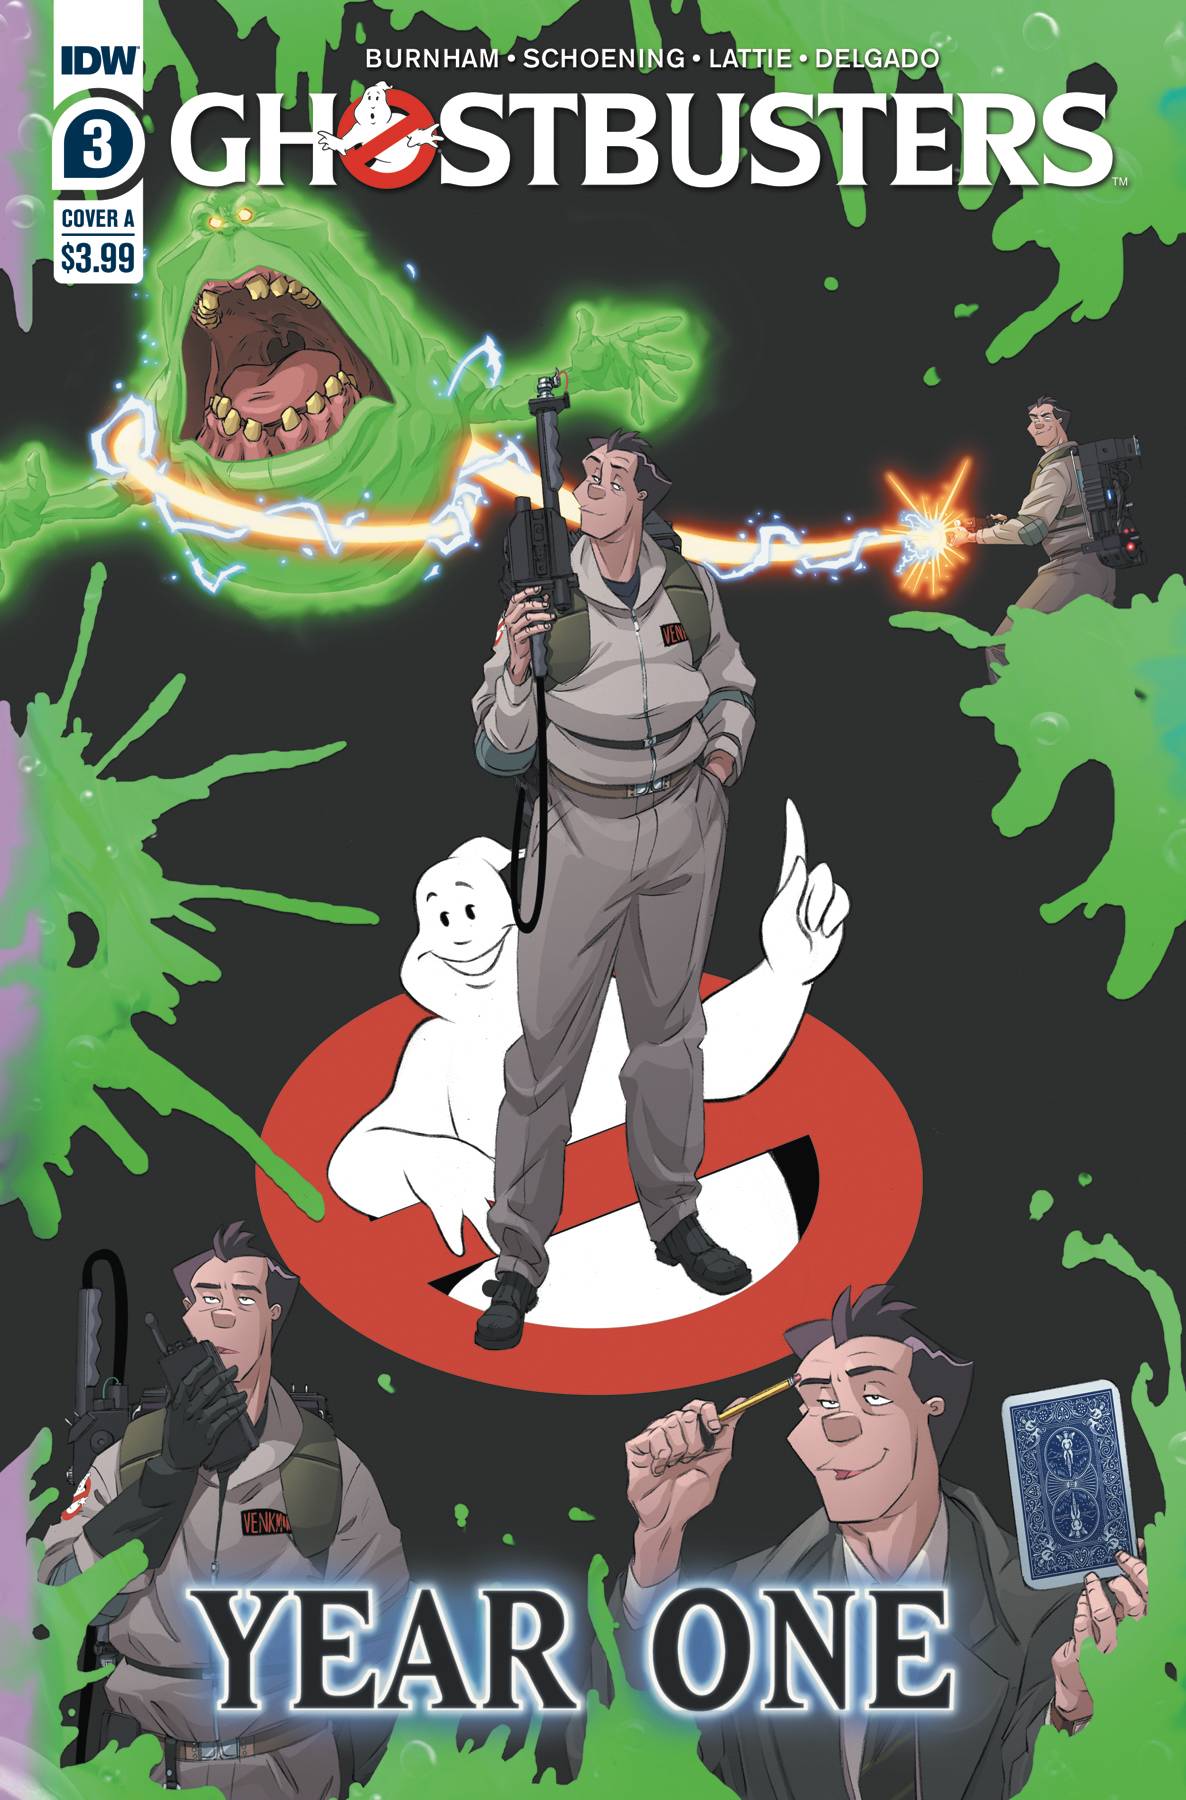 Ghostbusters: Year One #3 (2020)